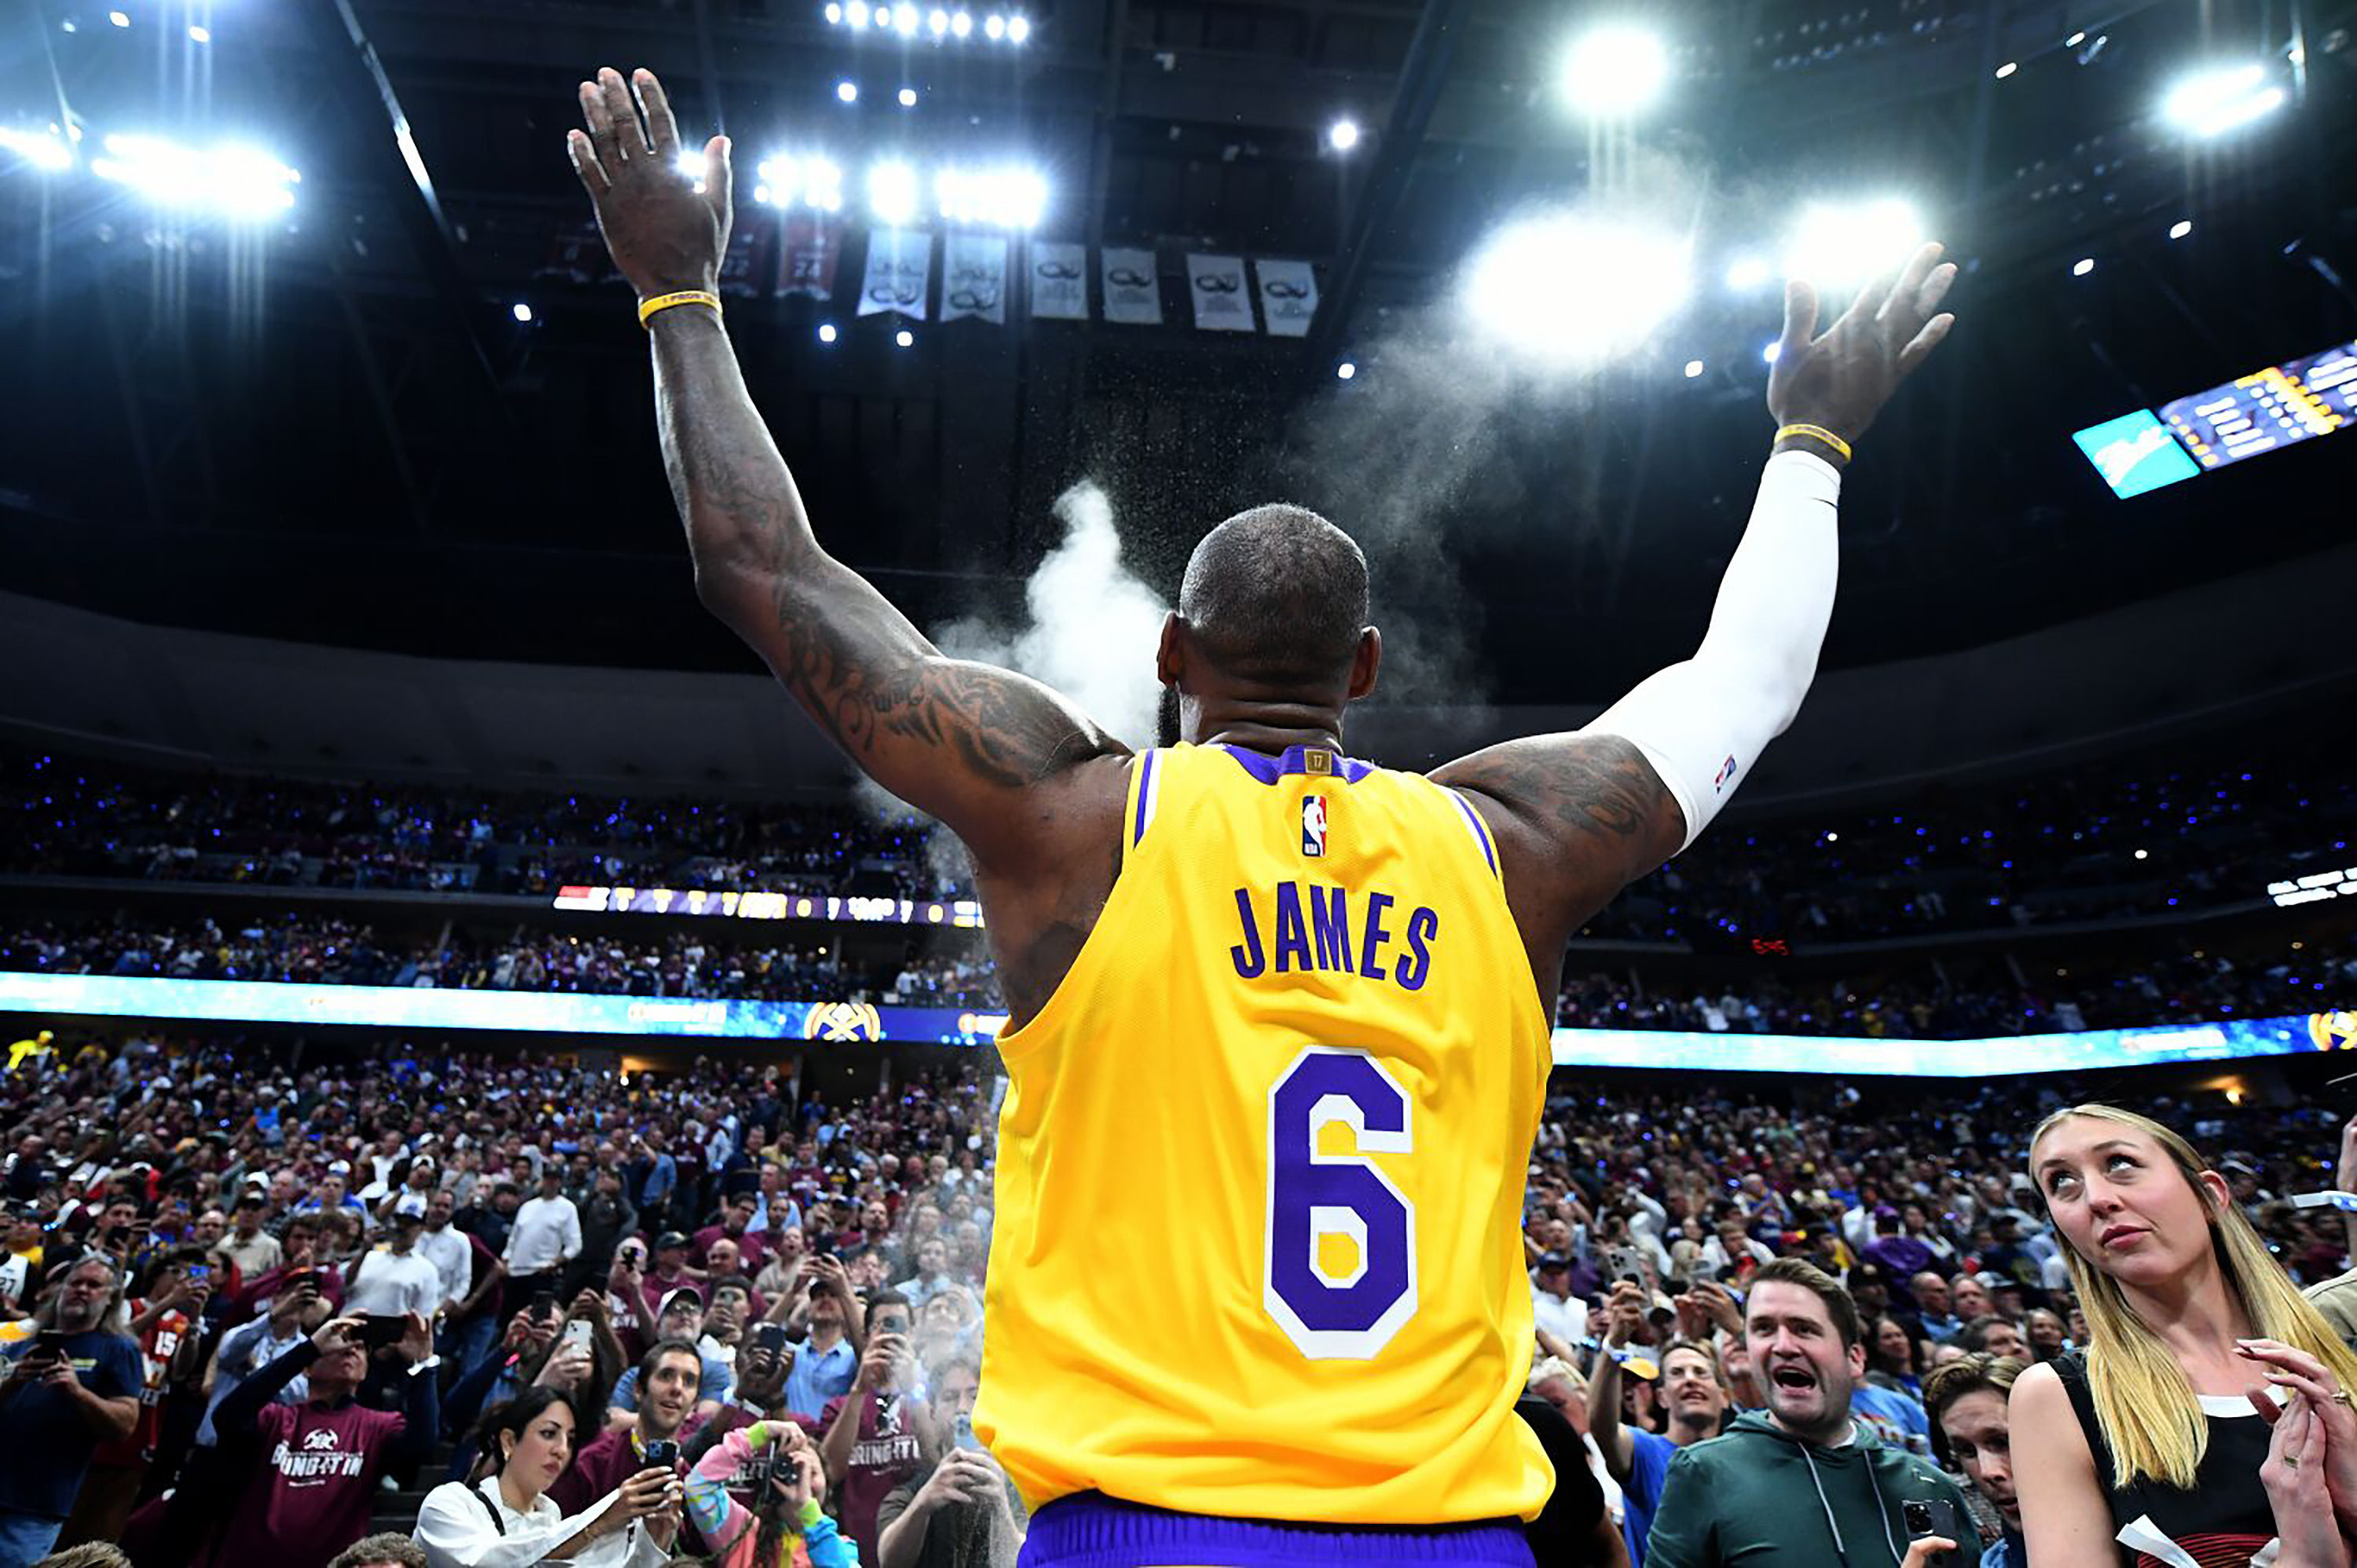 LeBron James, hungry for another gold medal win, plans to play for US in Paris Olympics. Photo: TNS